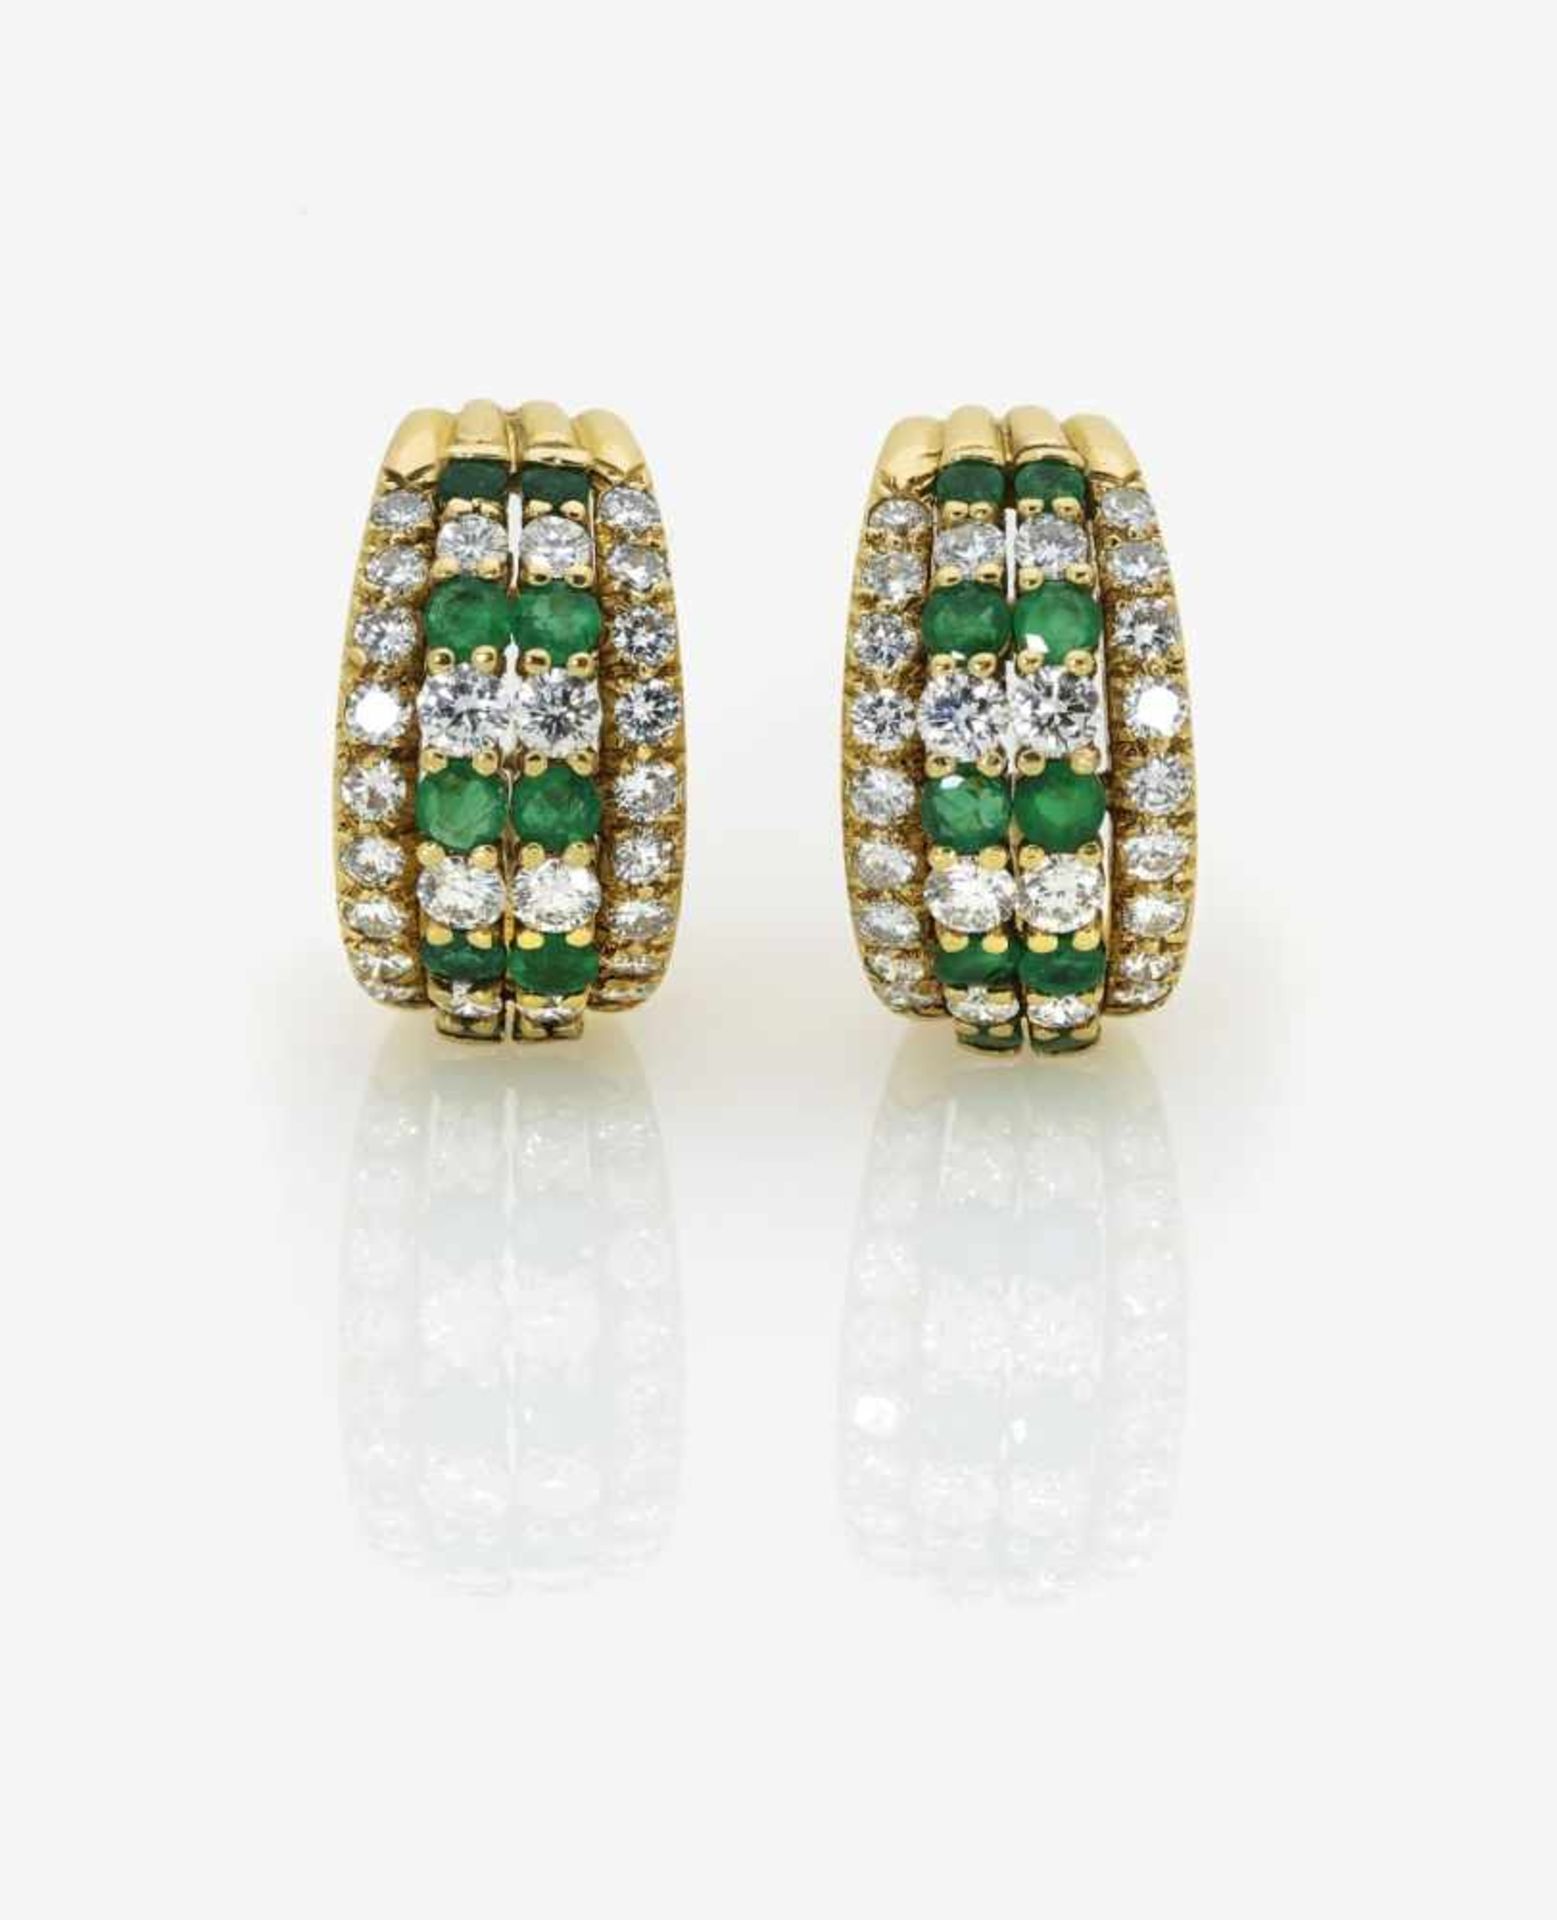 A Pair of Emerald and Diamond Ear ClipsUSA, 1970s-1980s 18K yellow gold (750/-), stamped. 52